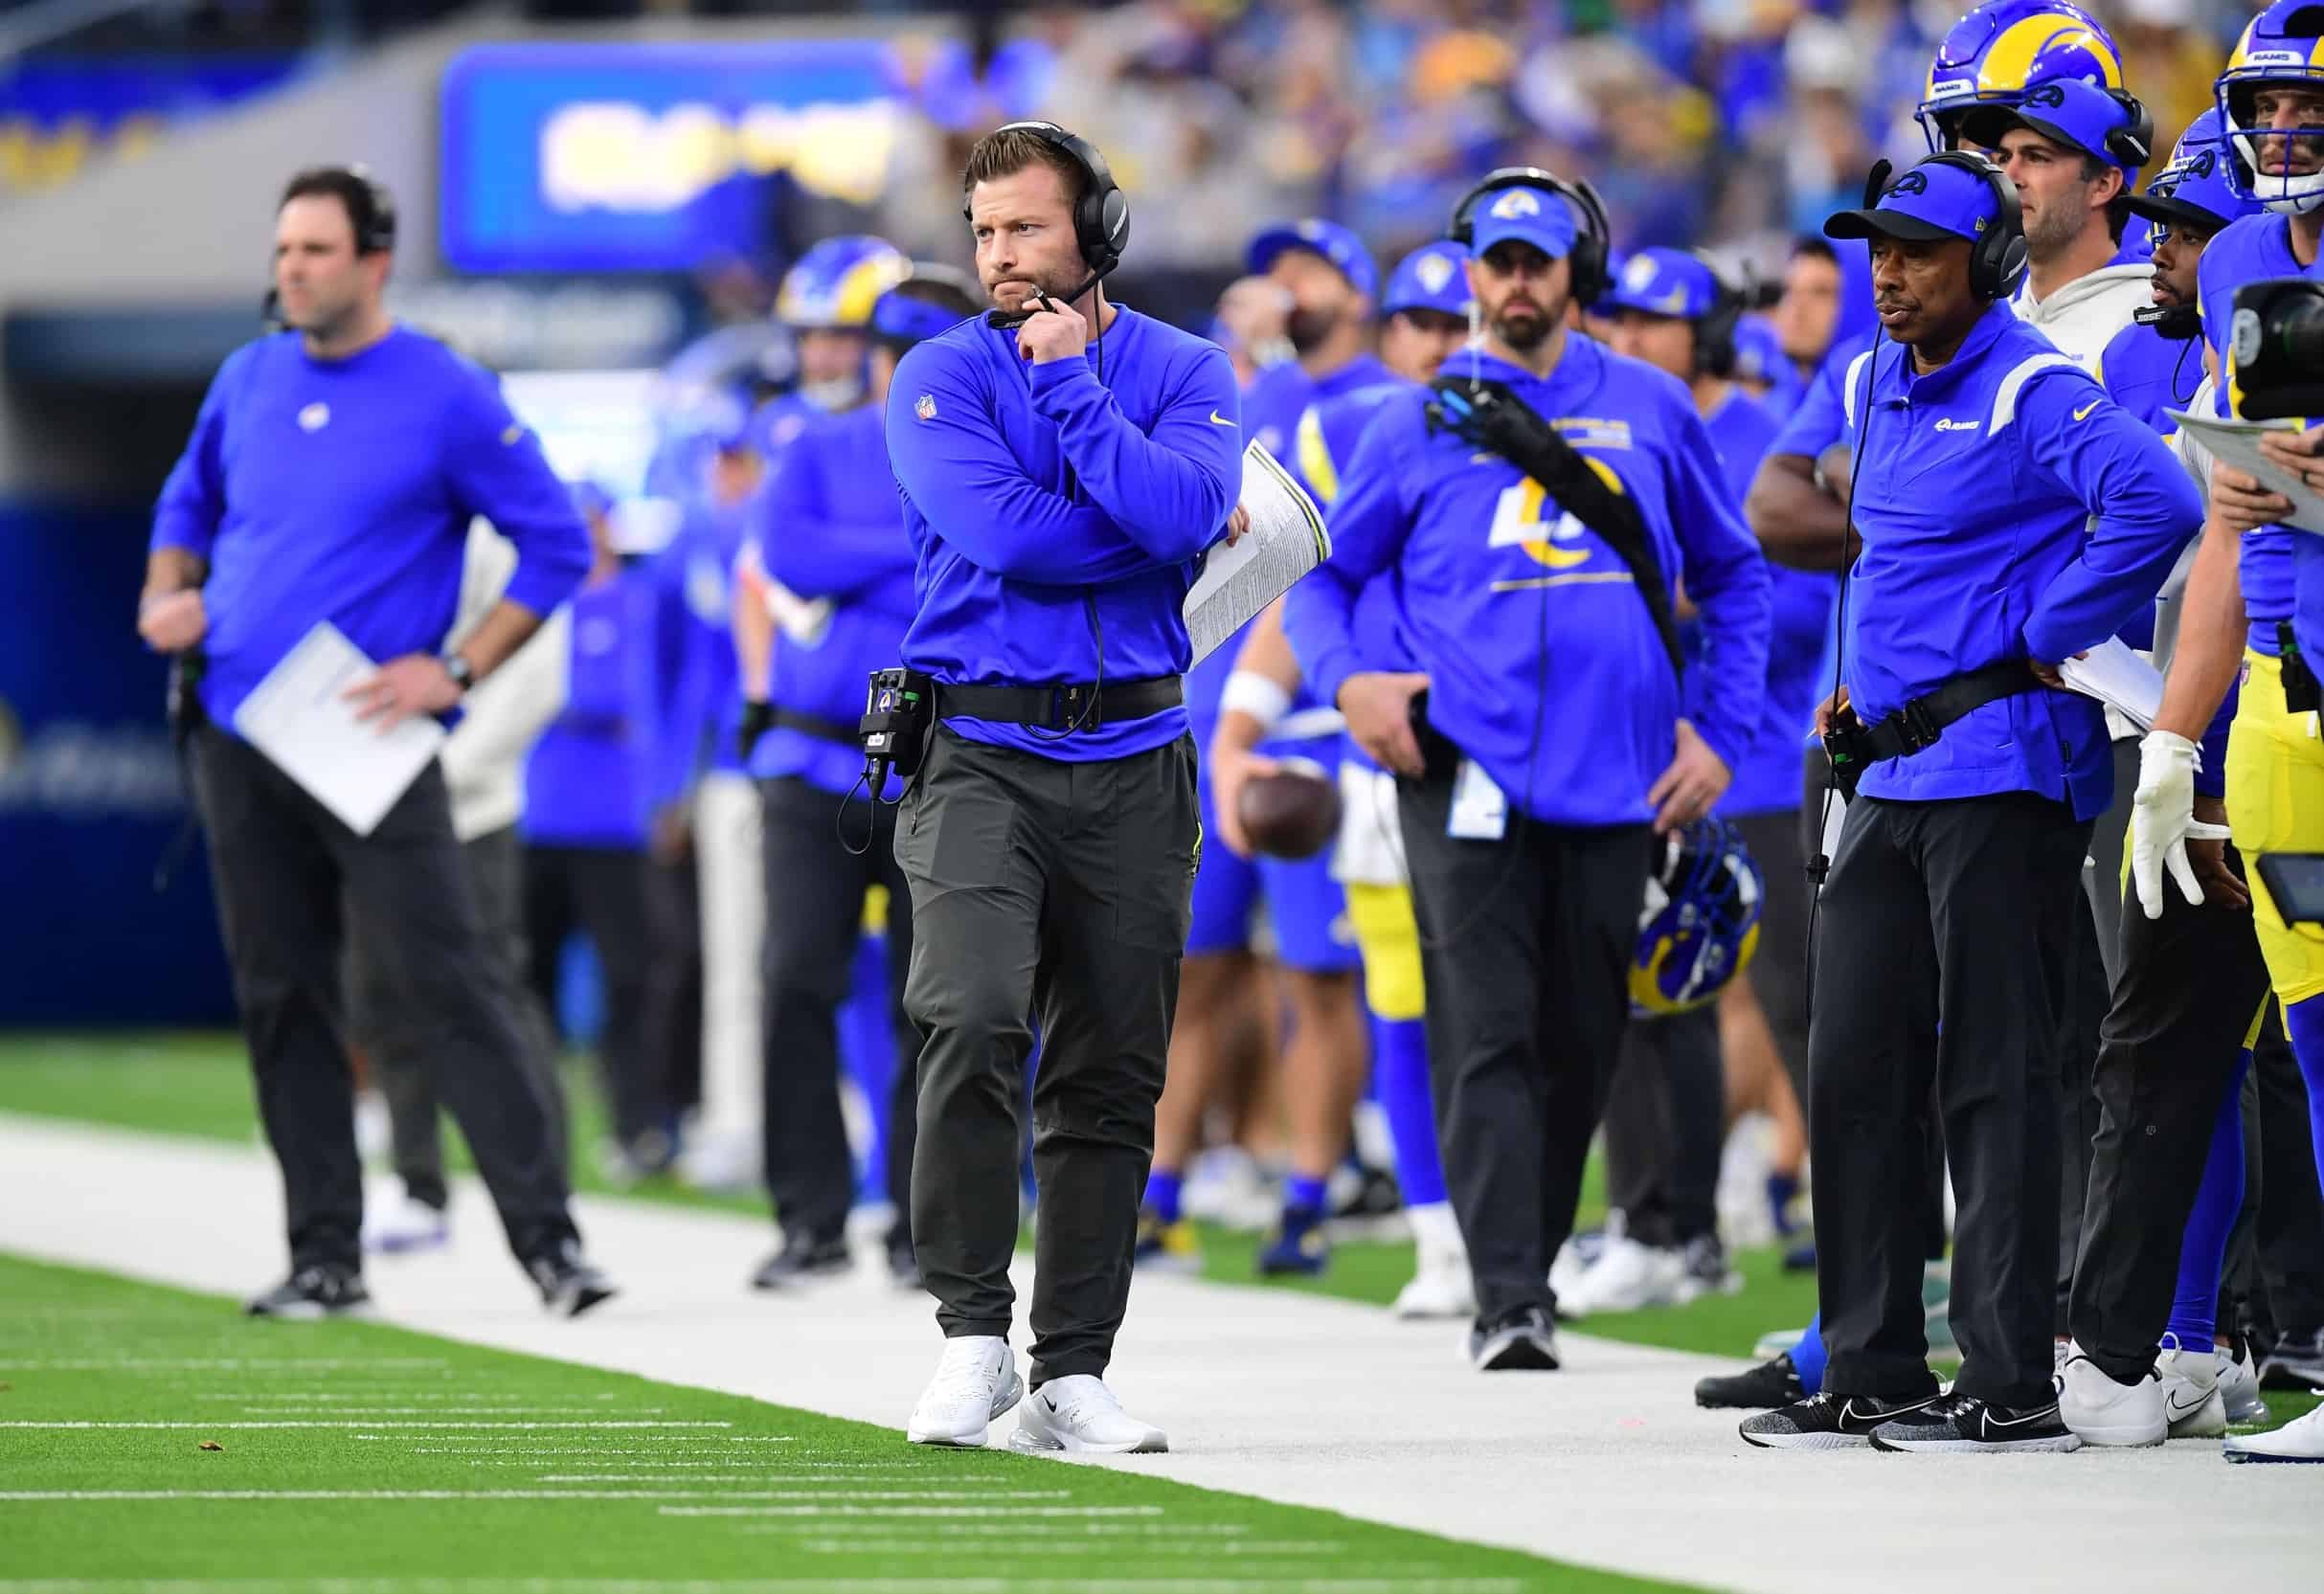 Los Angeles Rams coaching staff for Super Bowl 56